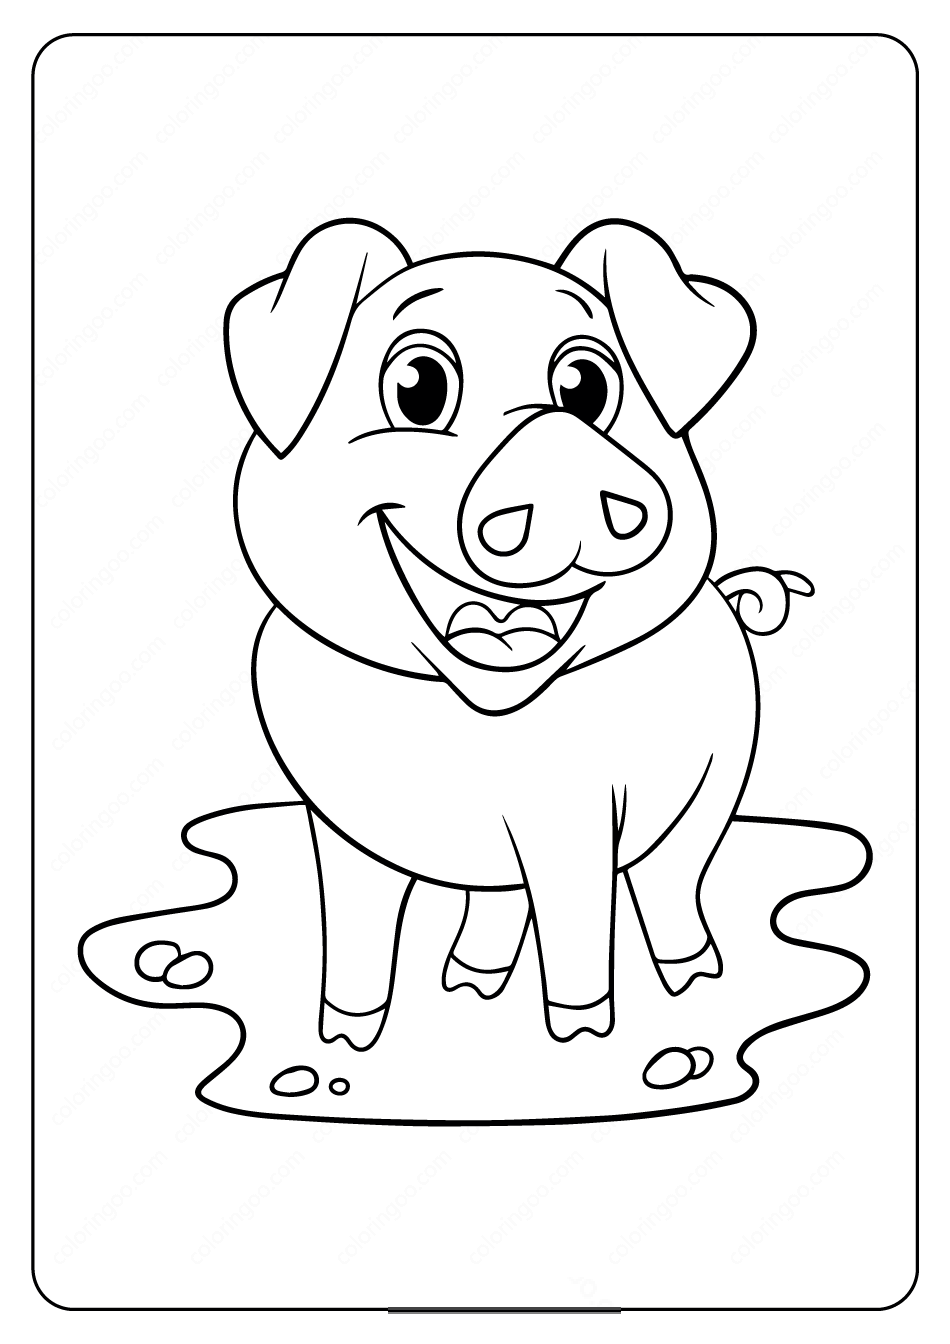 Printable Baby Pig coloring pages Free For Kids